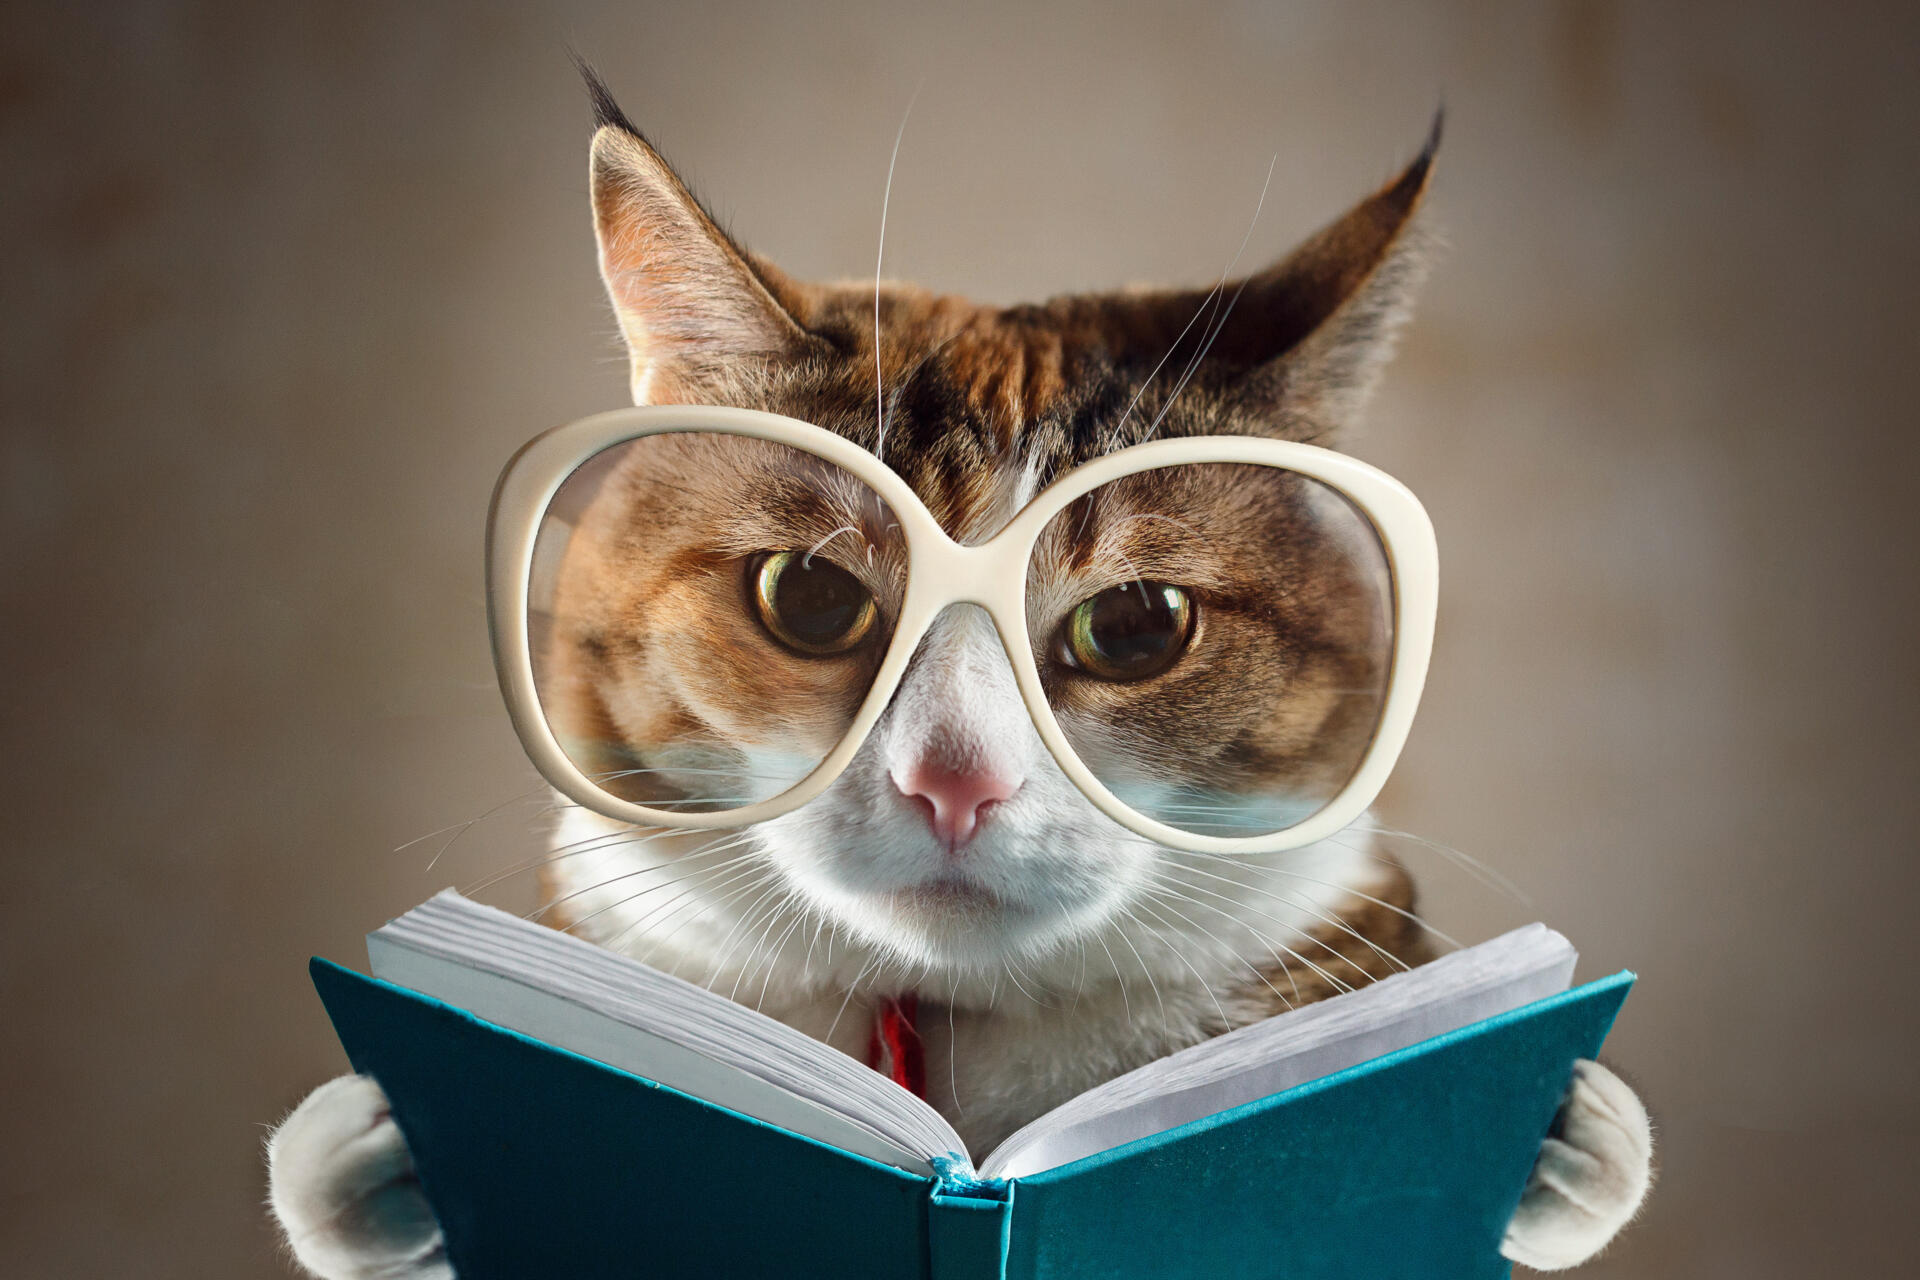 Cat in glasses holding a turquoise book and strictly looks into the camera. Concept of education, knowledge, etc.